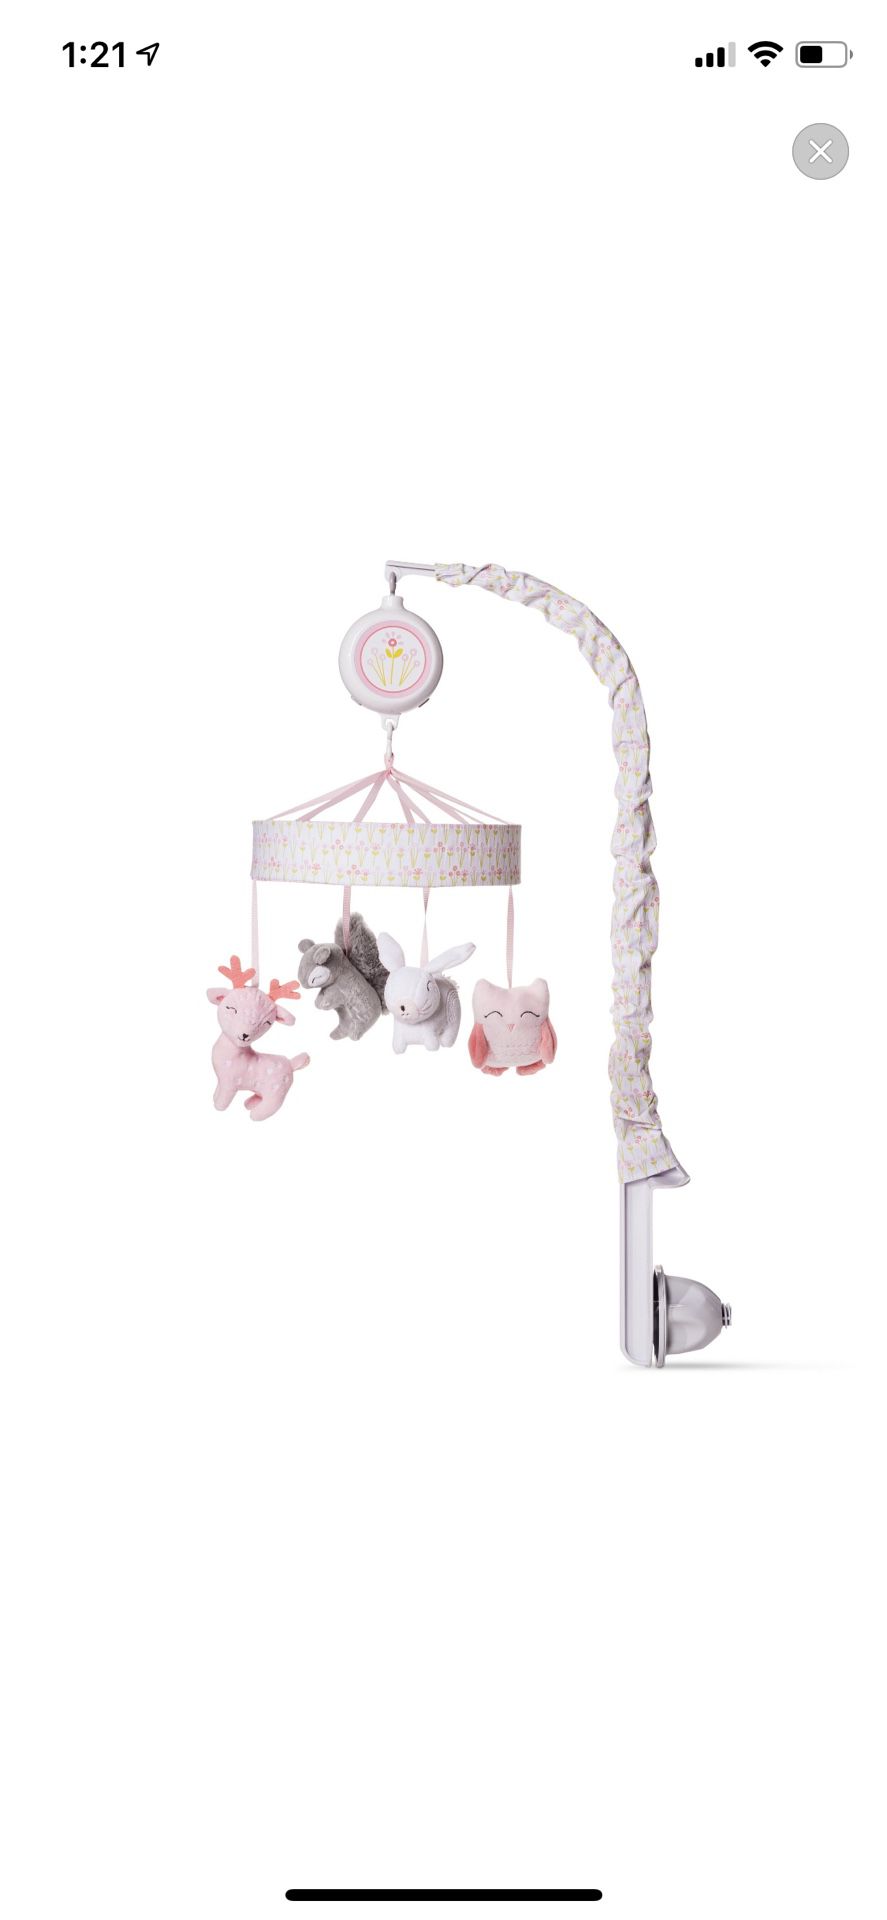 Crib mobile forest frolic-cloud island-pink